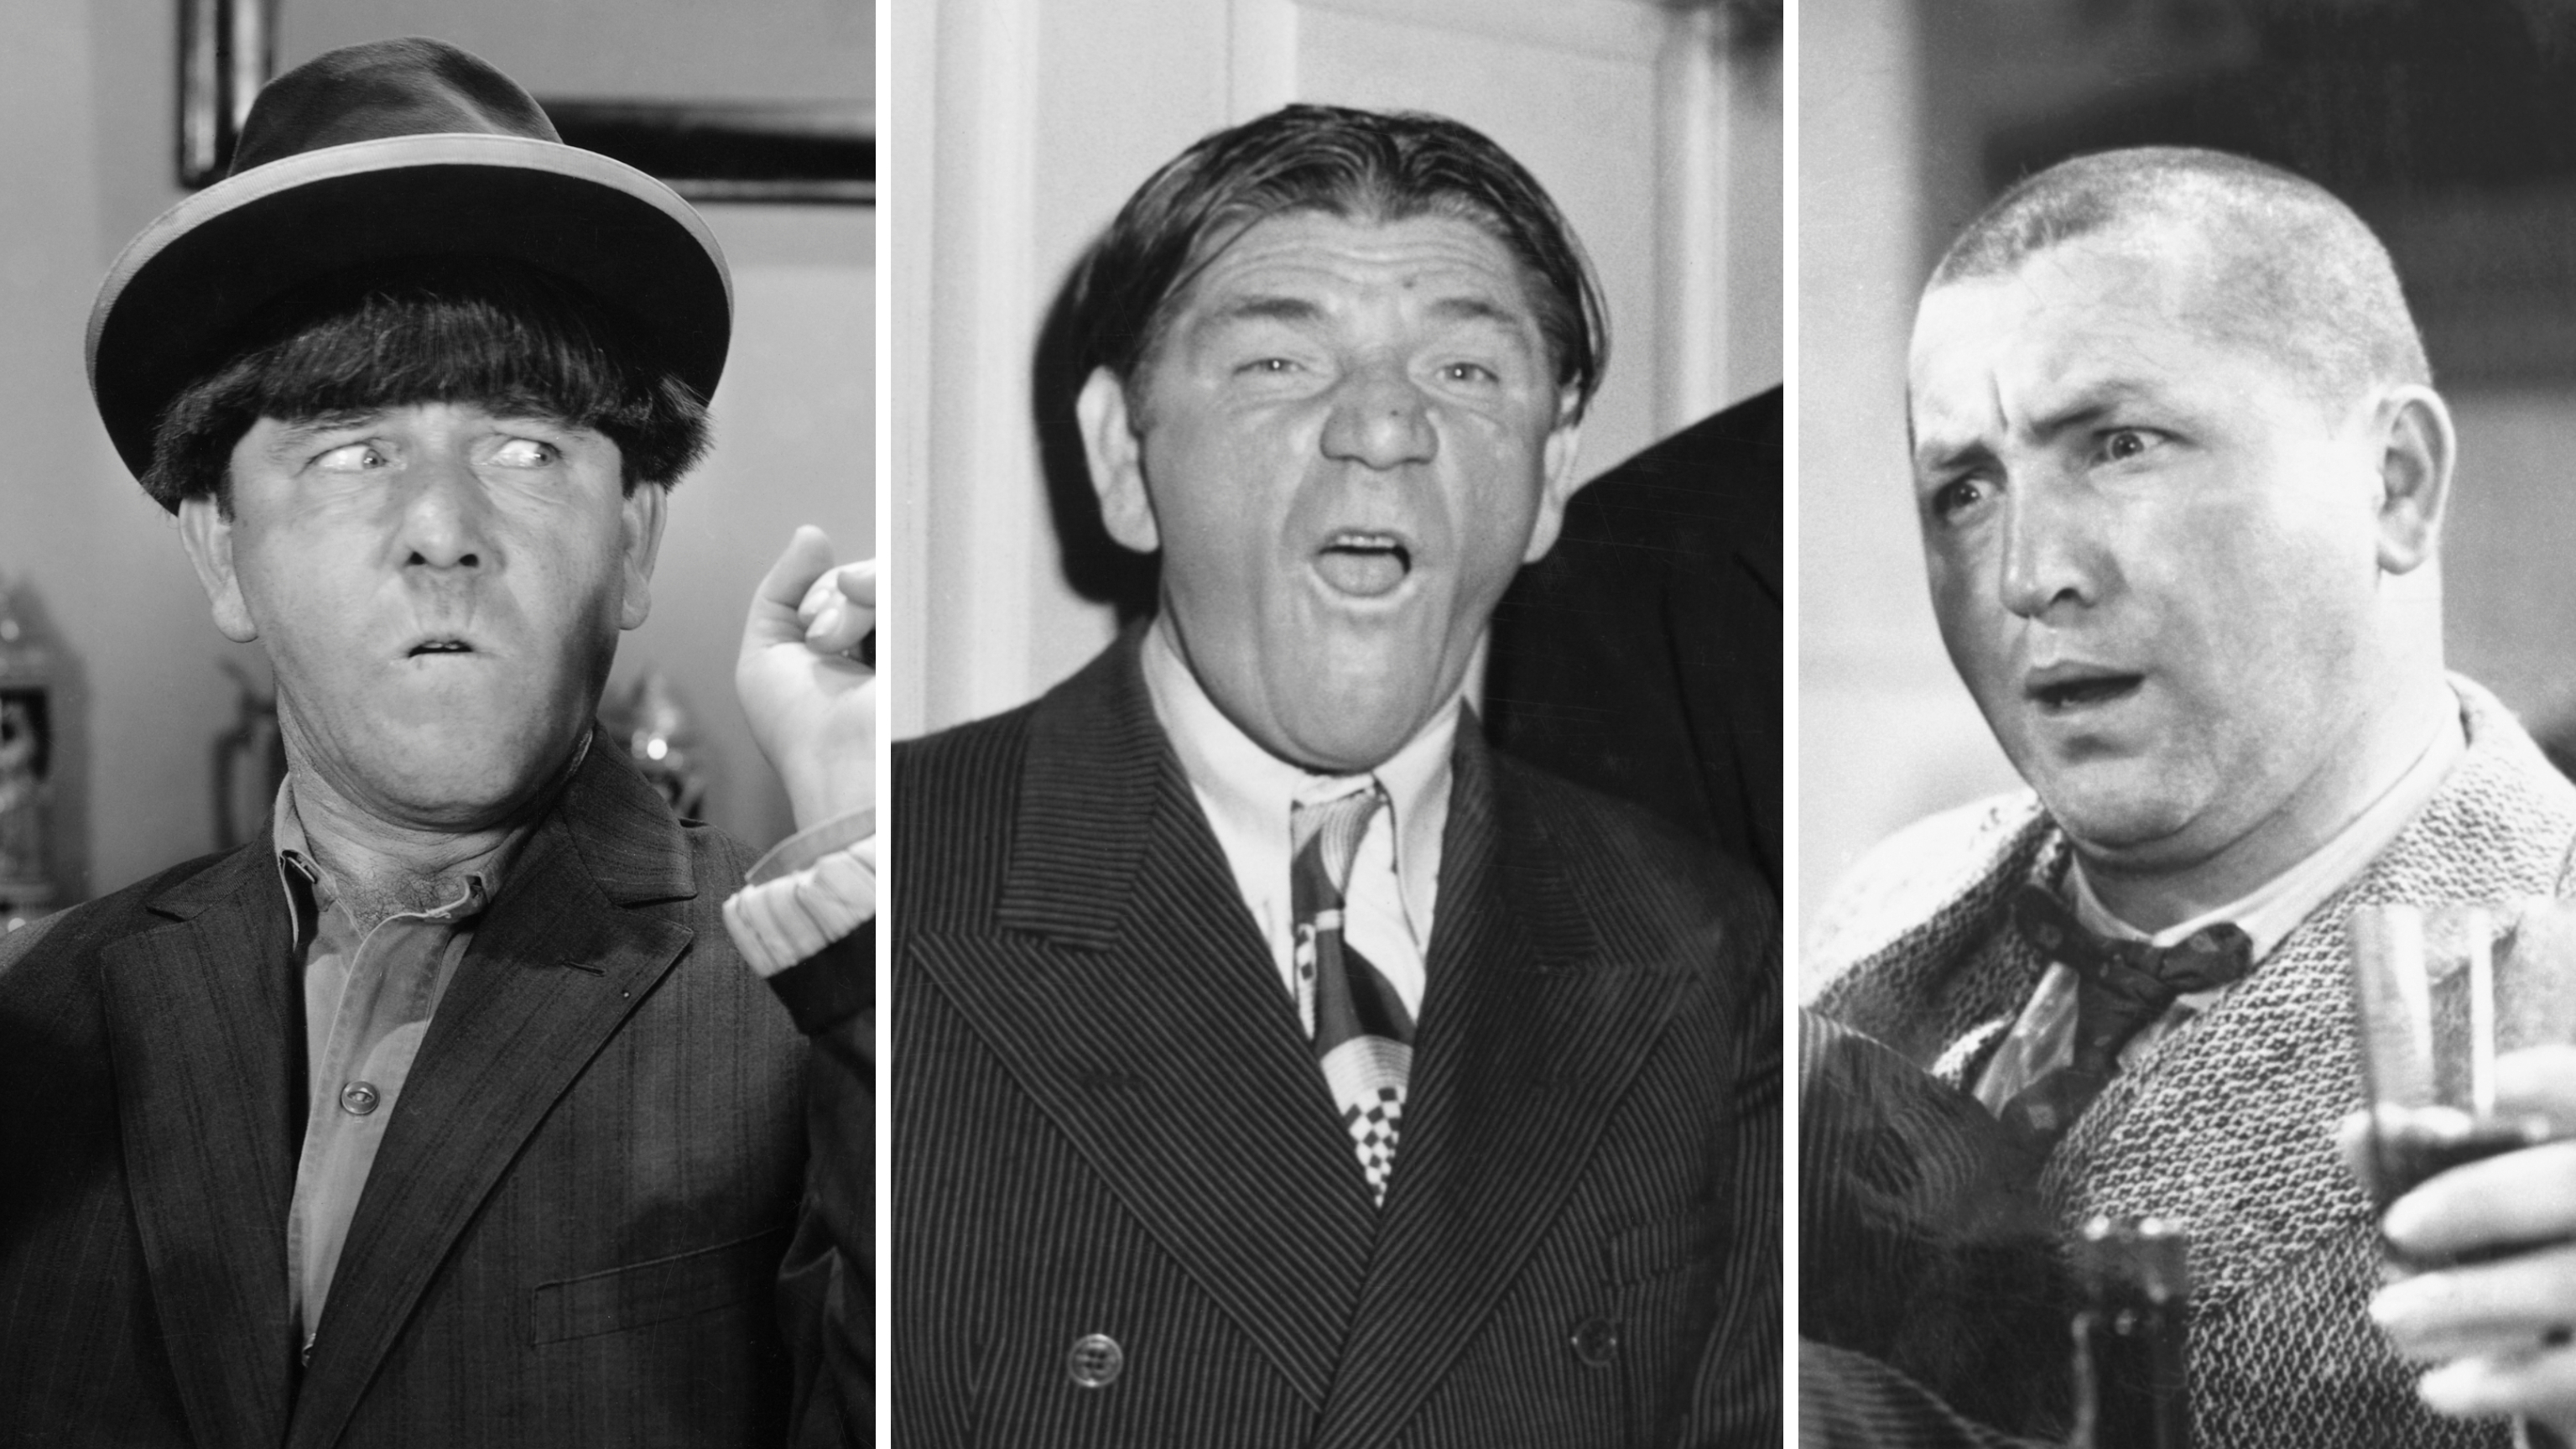 The Three Stooges: Learn All About Moe, Shemp and Curly Howard